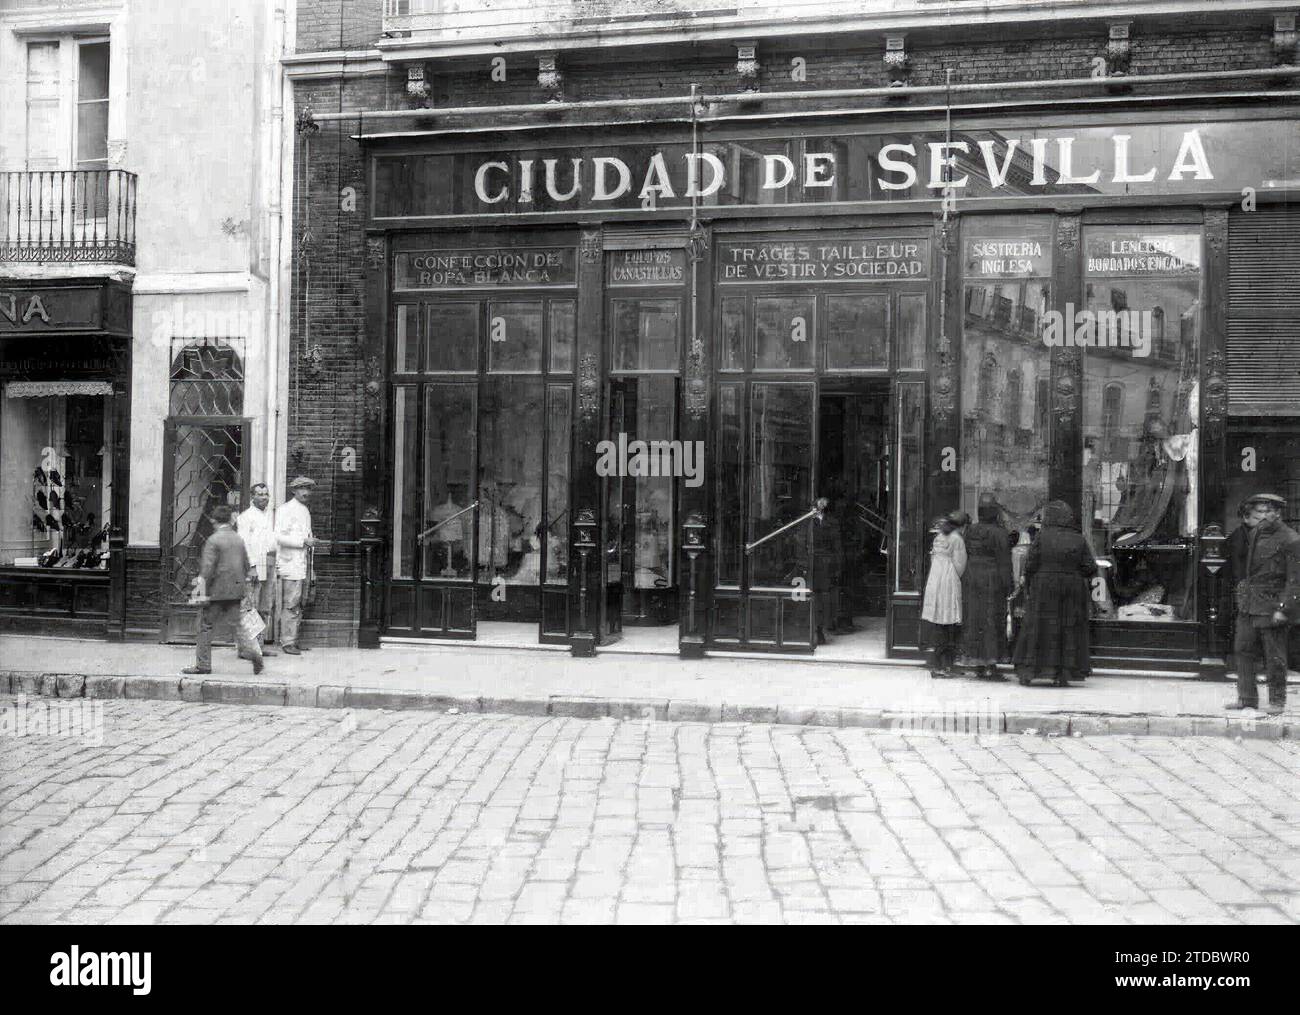 02/28/1918. City of Seville. Great clothing house for ladies and gentlemen. Bridal Equipment, Very Important Stores, Manila Shawls, Embroidery and Lace. Gasquero and Cia.; Franco, 20; Aguijas, 16 and 18 and Mercaderes, 7 and 9, Seville - Approximate date. Credit: Album / Archivo ABC / José Zegri Stock Photo